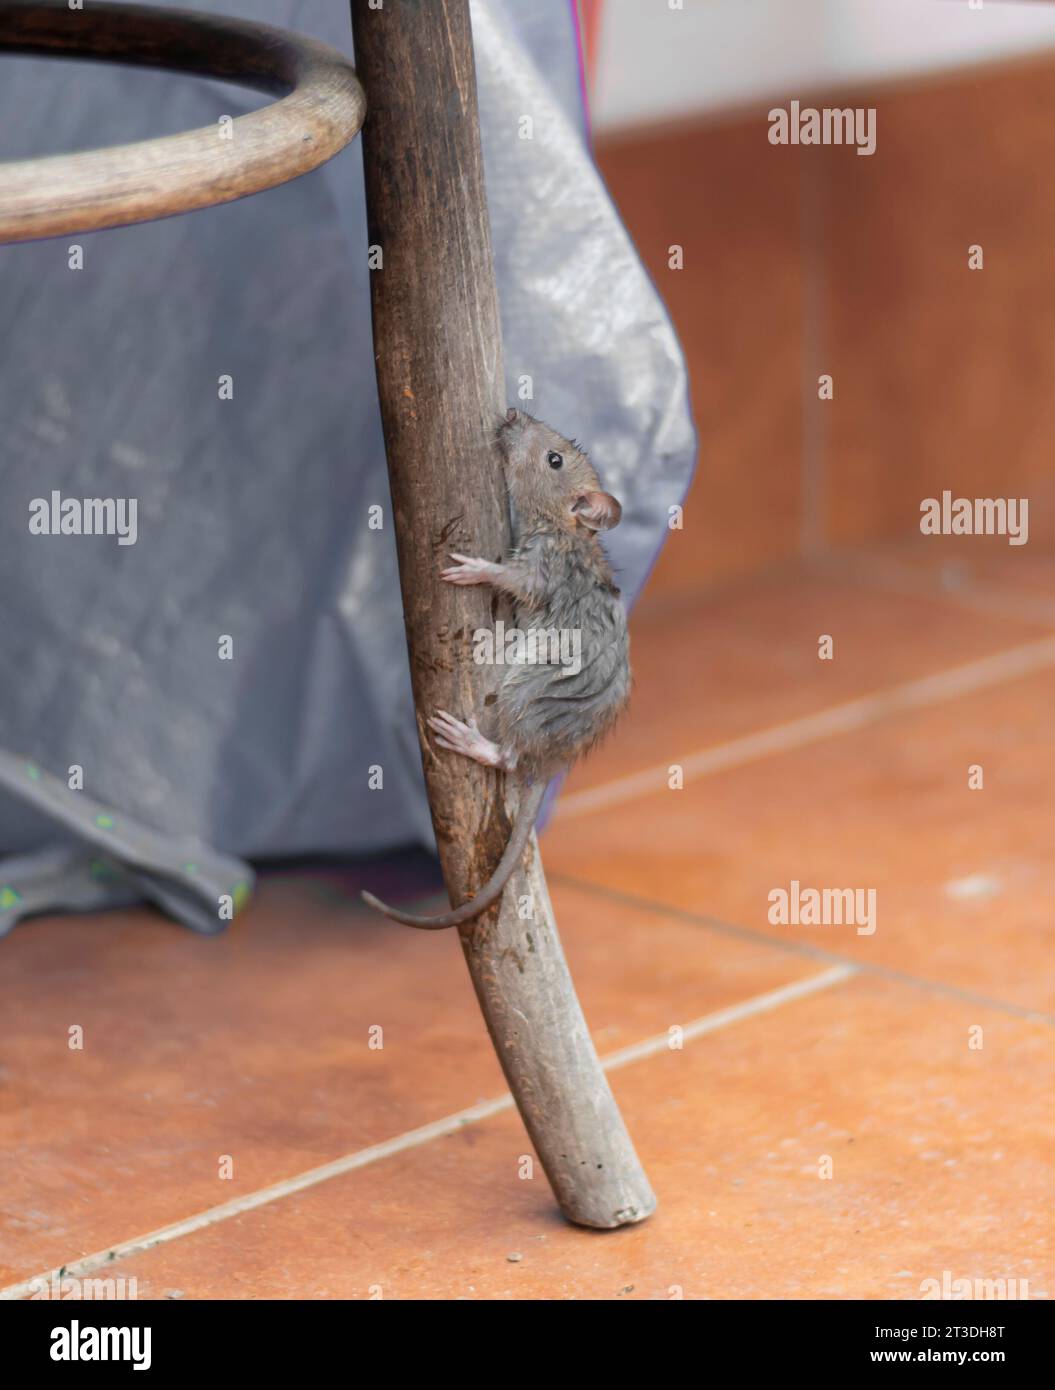 Mouse  (Mus musculus) climbing the old antique wooden chair leg. Stock Photo